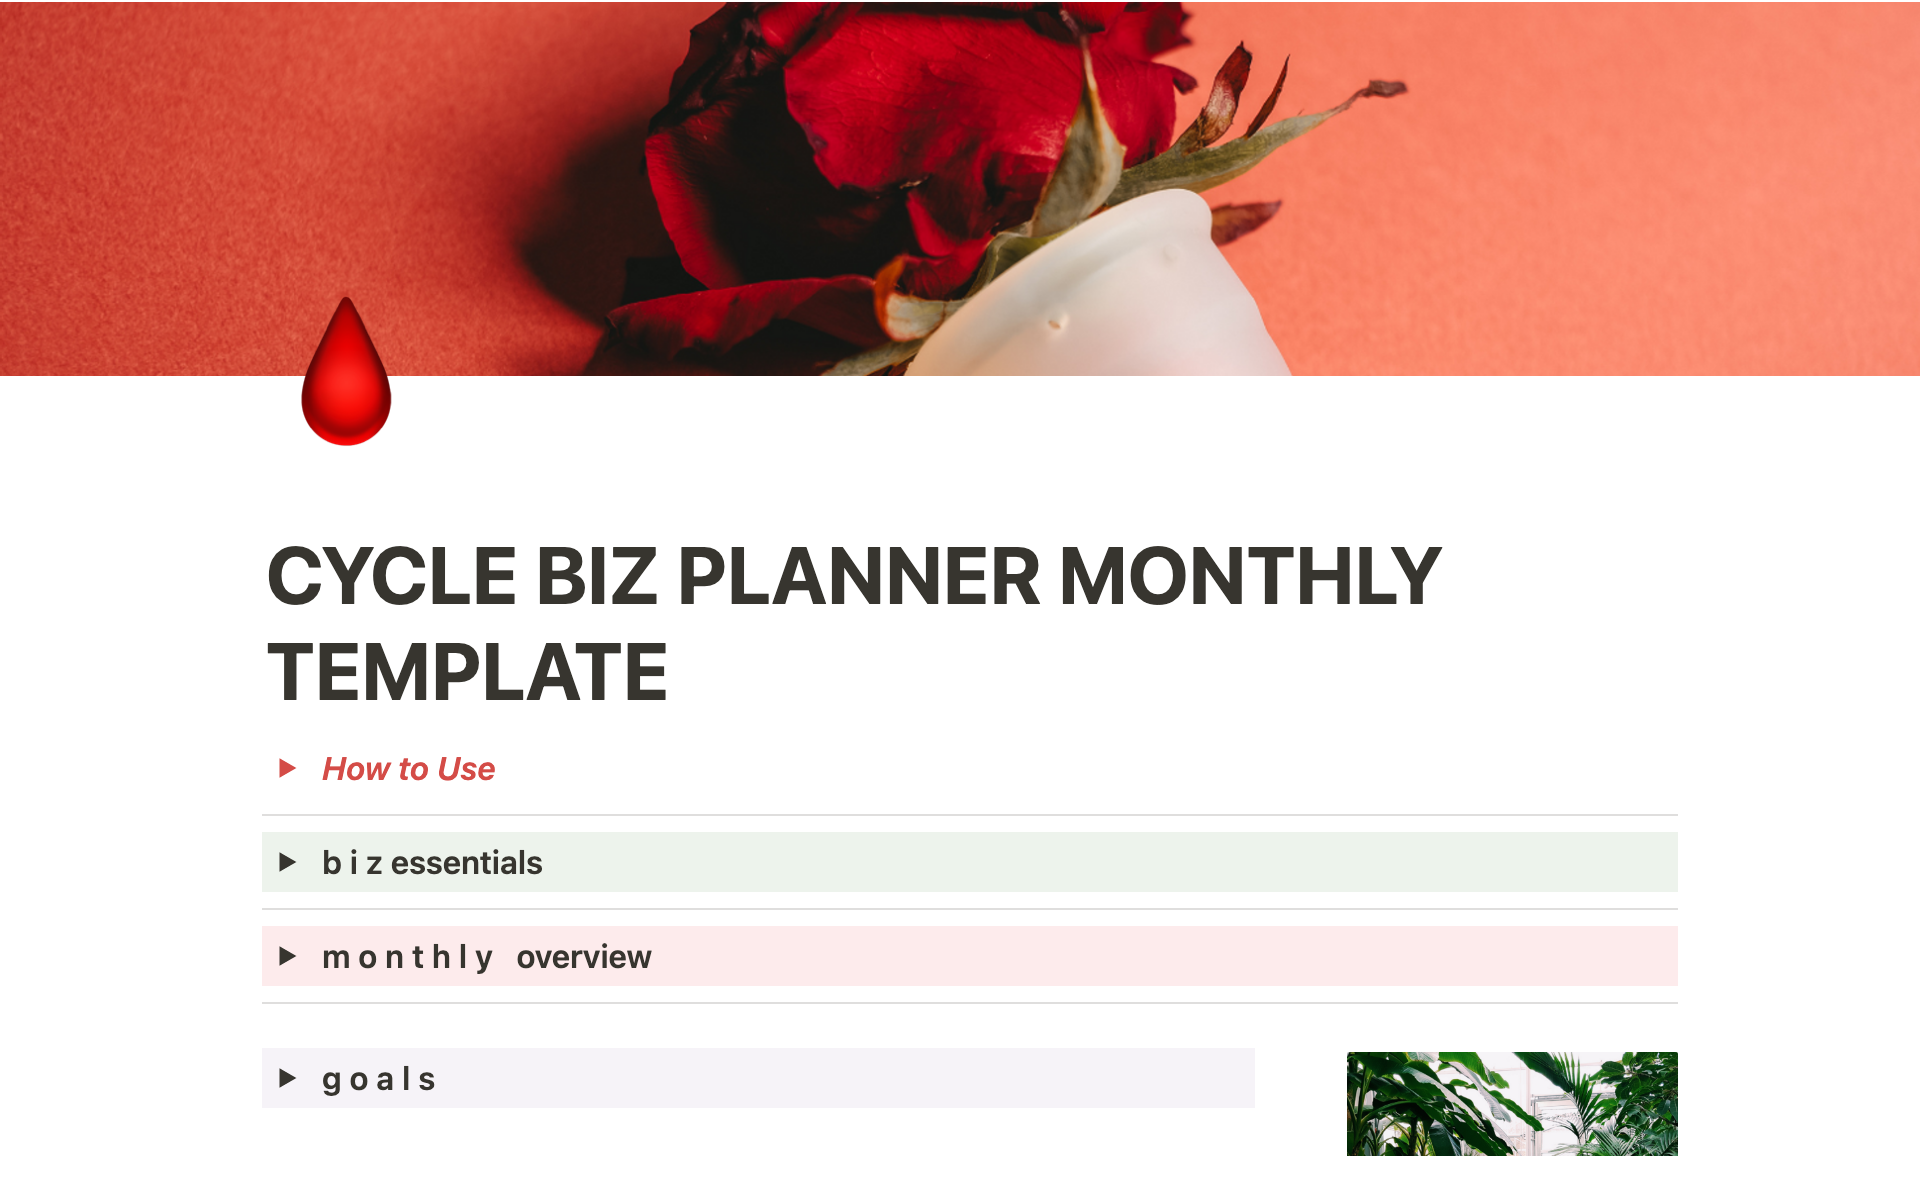 A monthly planner template to plan your business with your menstrual or moon cycle.